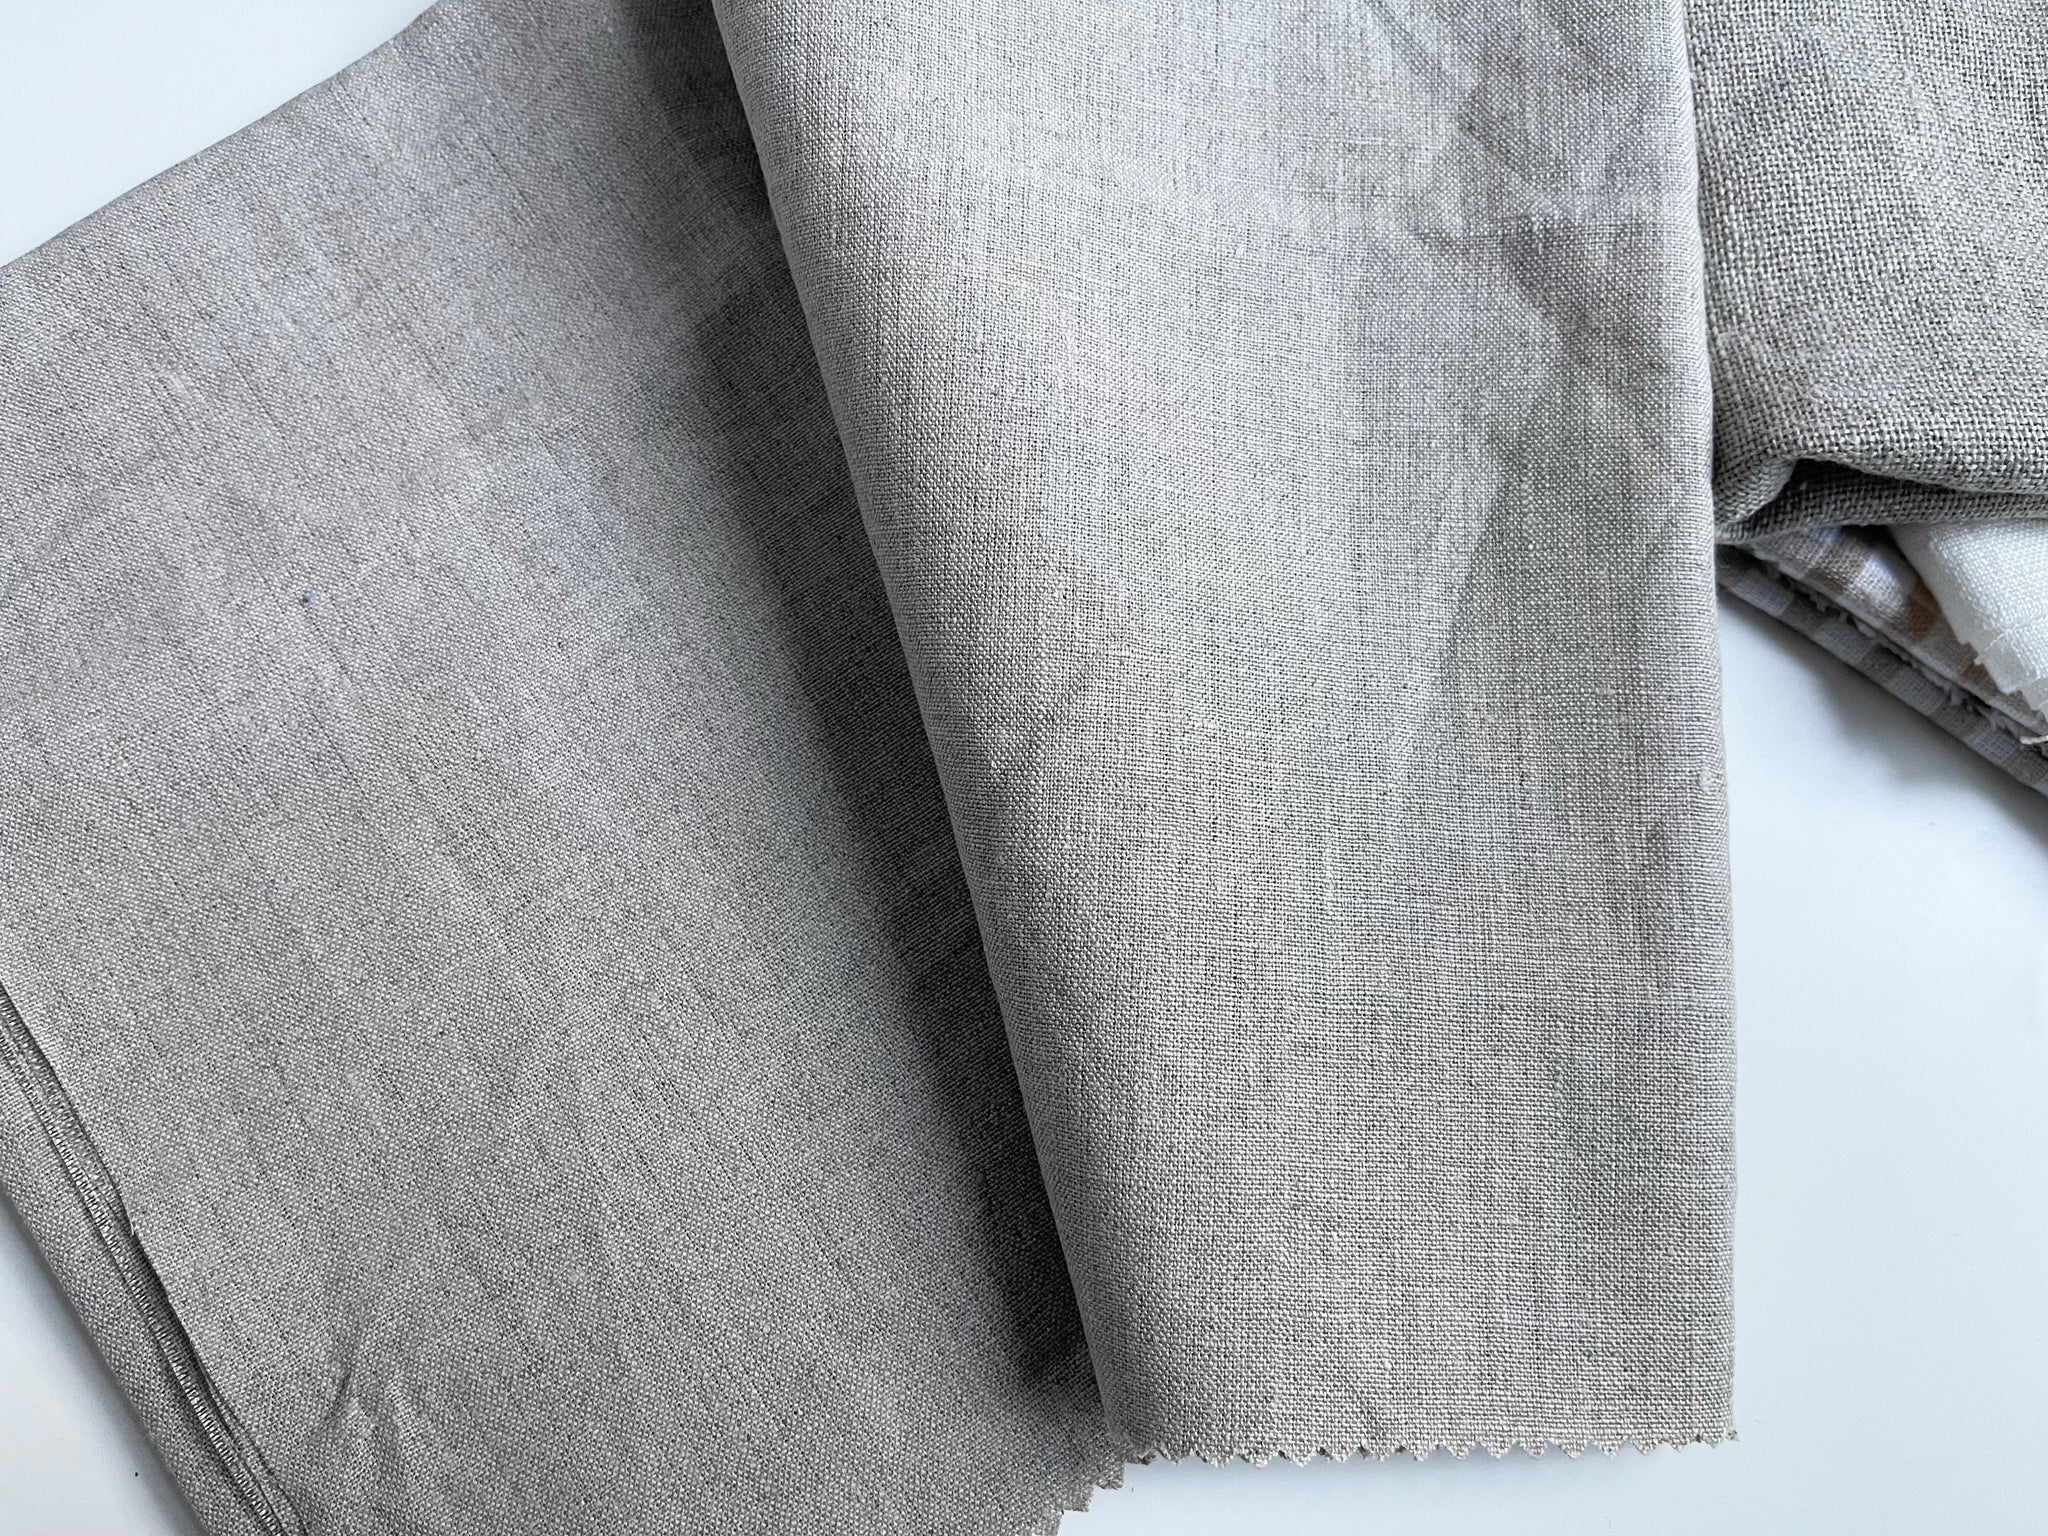 Linen Fabric Remnants - Floral Gingham, Ivory Washed, Natural and Natural Loose Weave